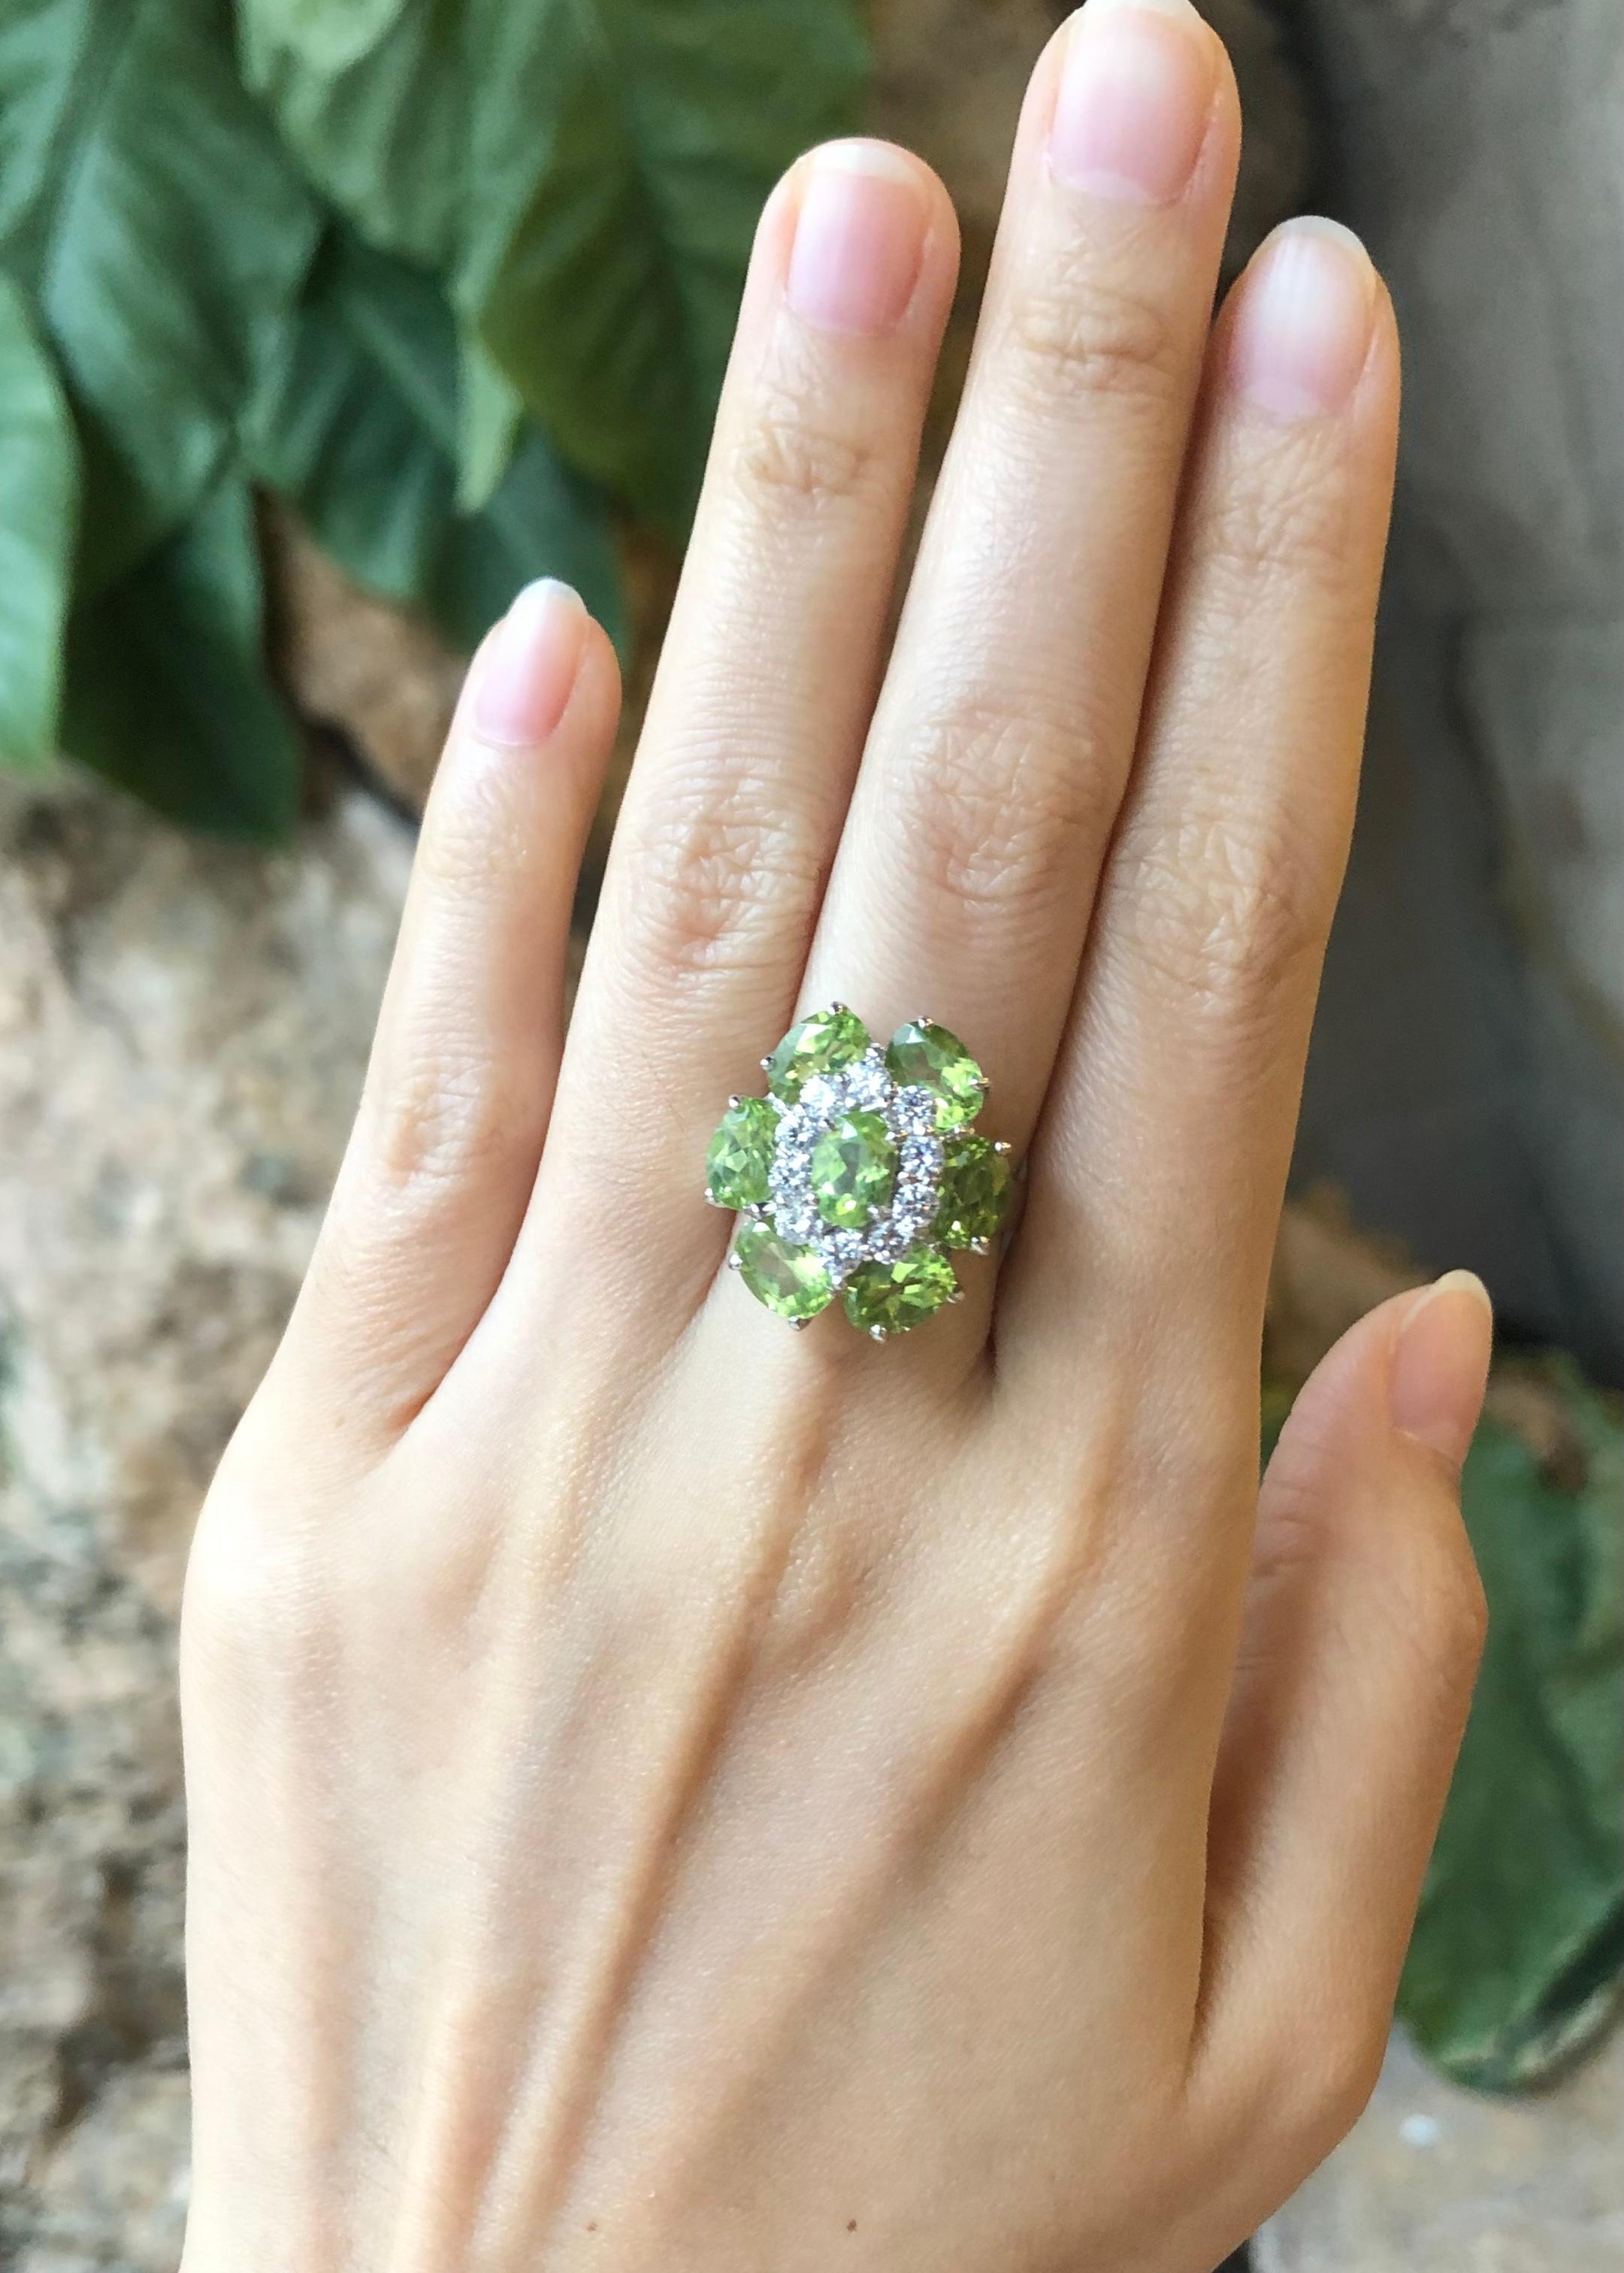 Peridot with Cubic Zirconia Ring set in Silver Settings

Width:  1.9 cm 
Length: 2.1 cm
Ring Size: 54
Total Weight: 8.53 grams

*Please note that the silver setting is plated with rhodium to promote shine and help prevent oxidation.  However, with